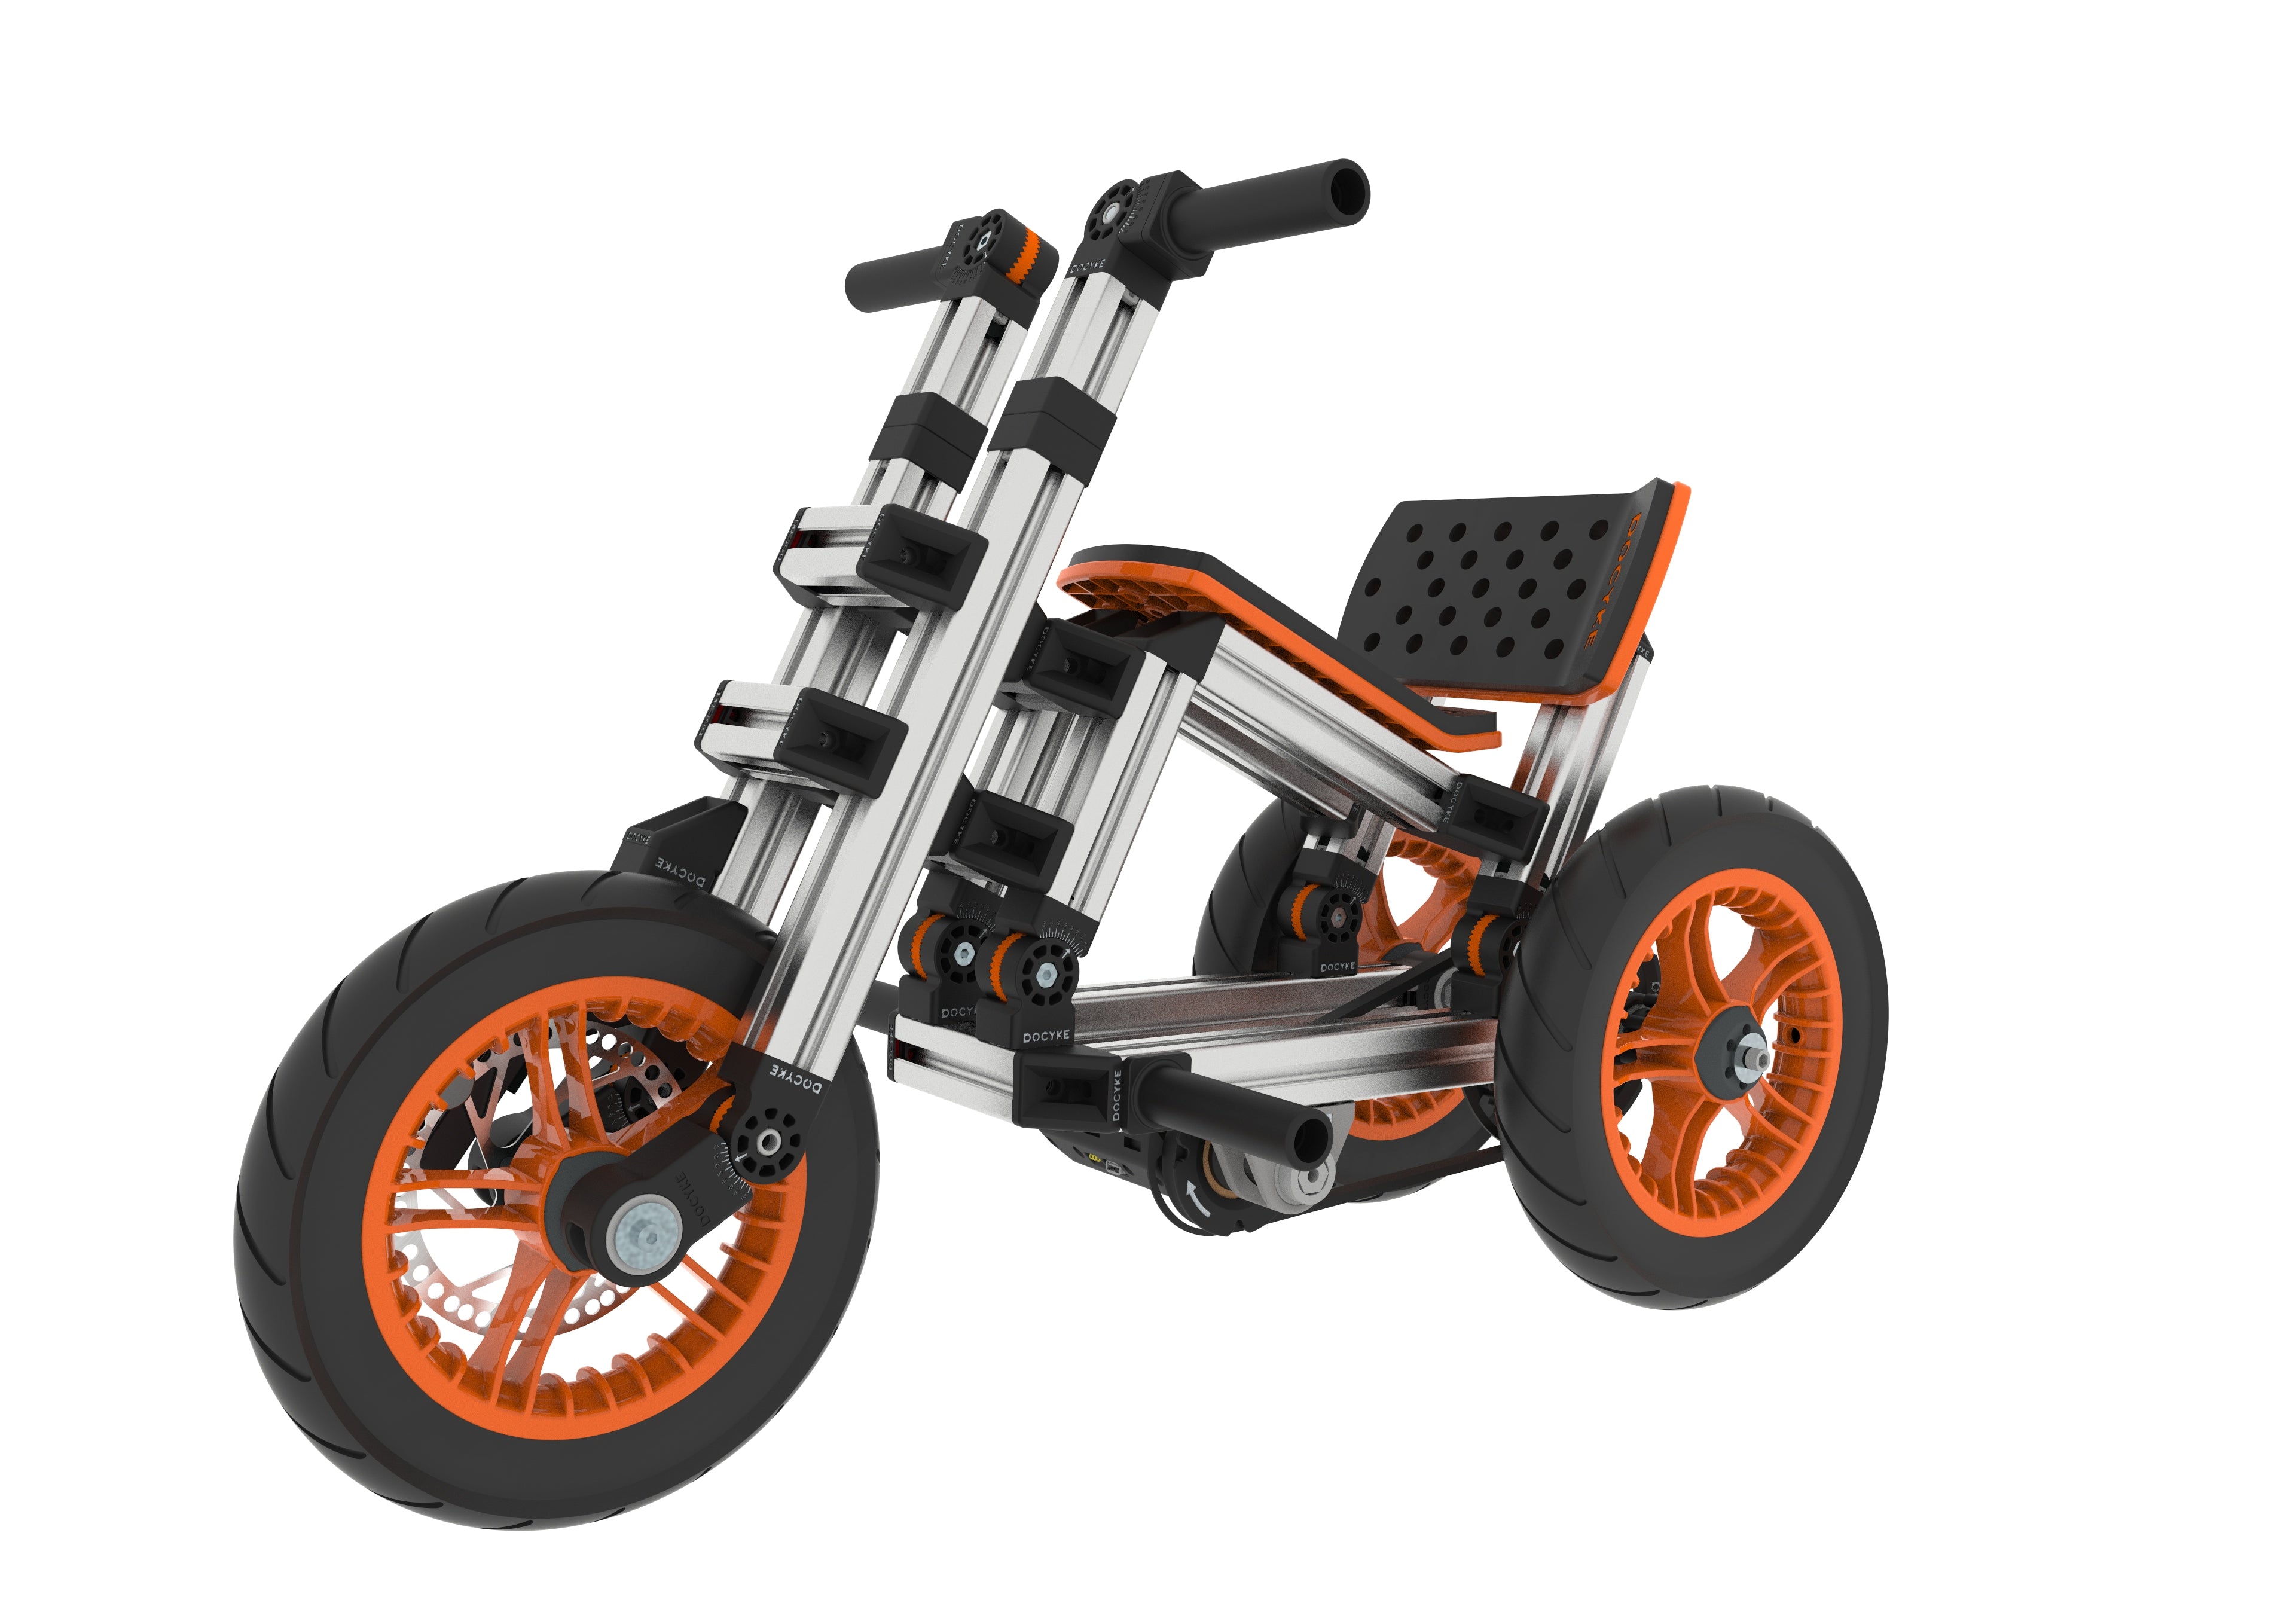 Modular design High-strength material electric innovation kart, more than 20 kinds of assembly methods